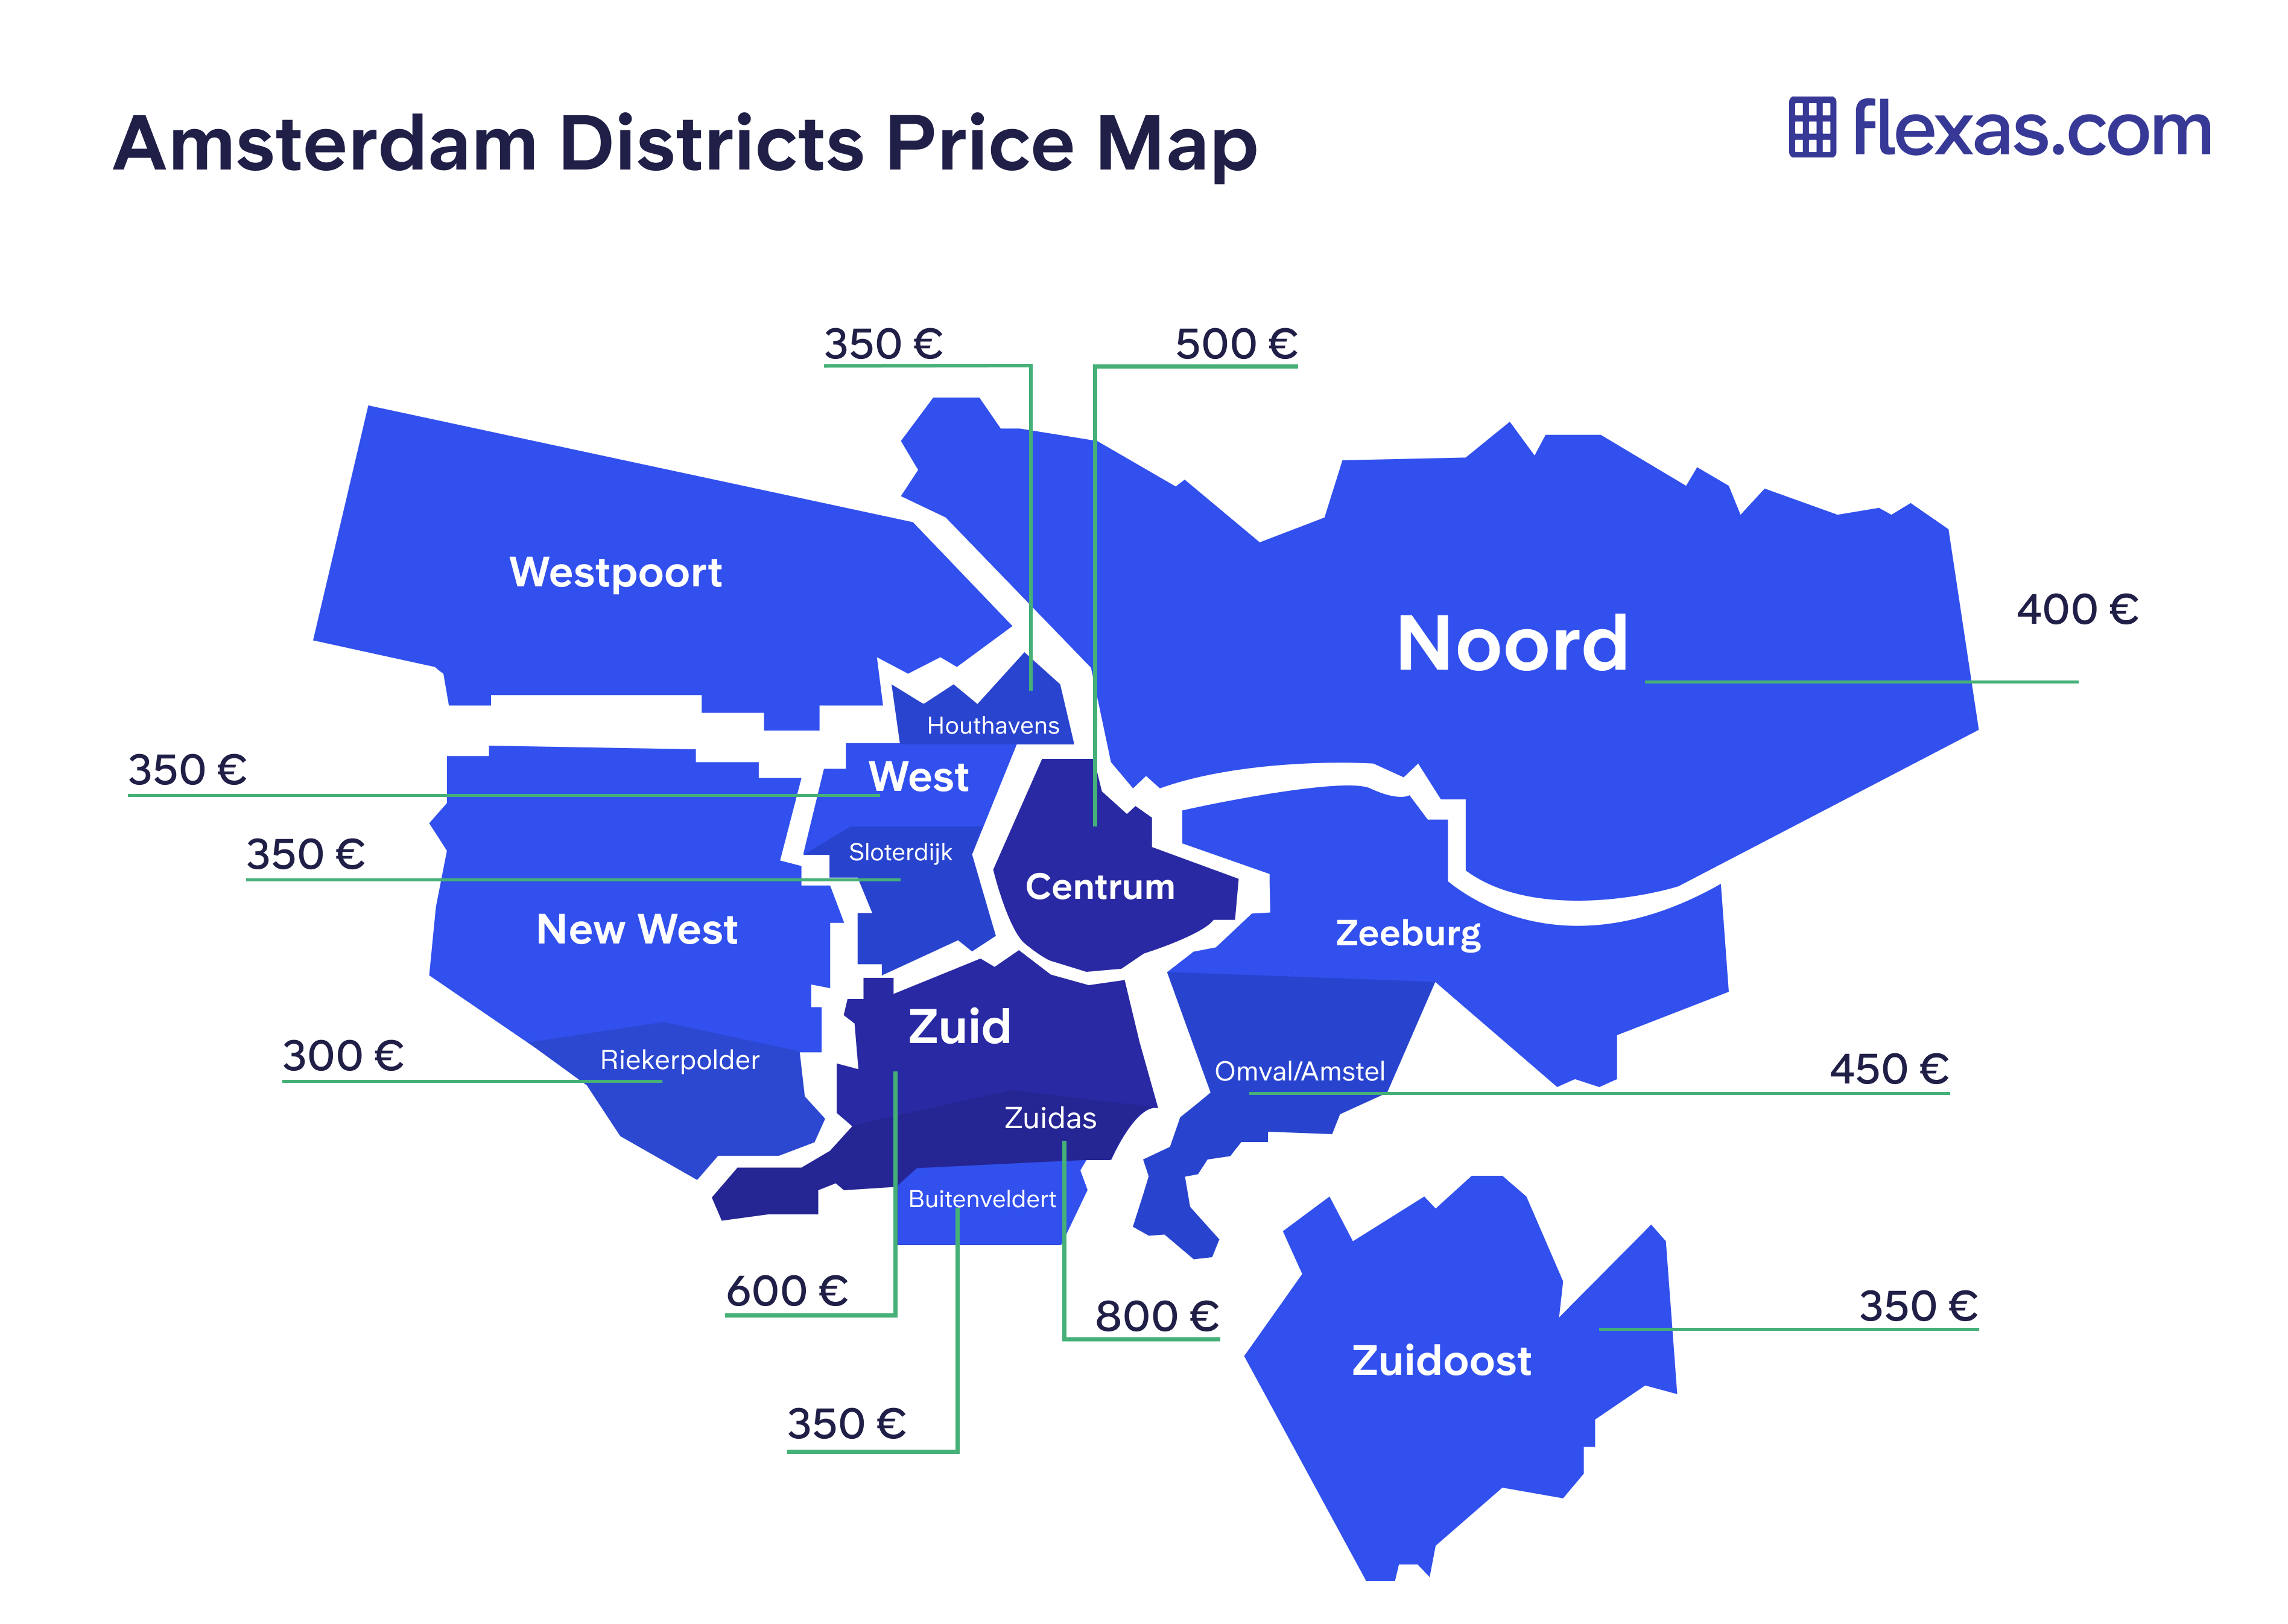 Amsterdam districts price map